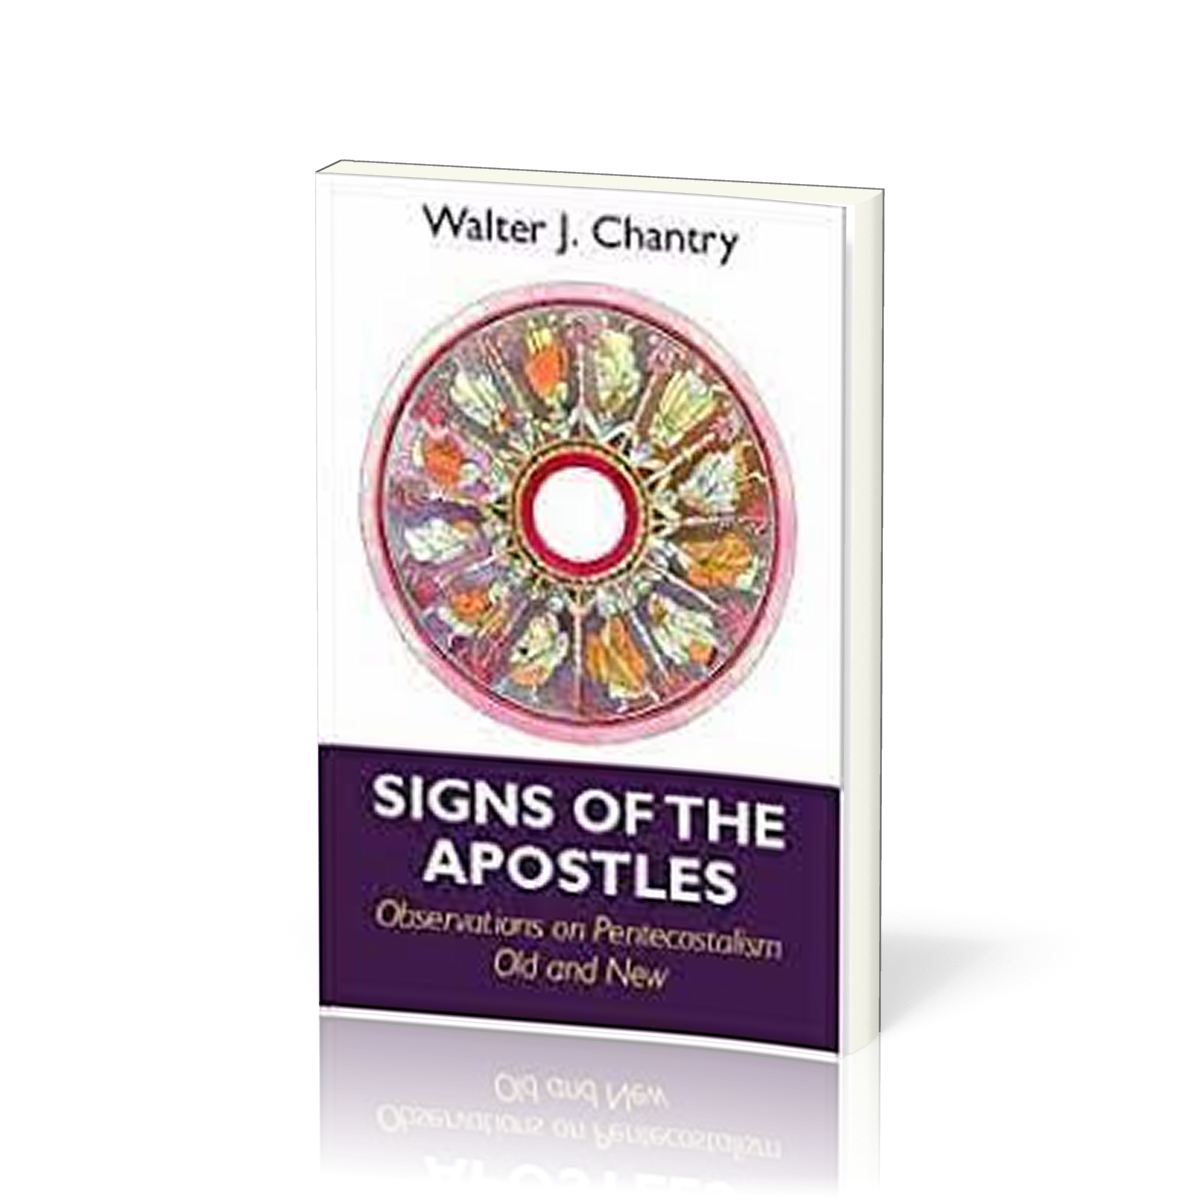 Signs of the Apostles - Observations on Pentecostalism